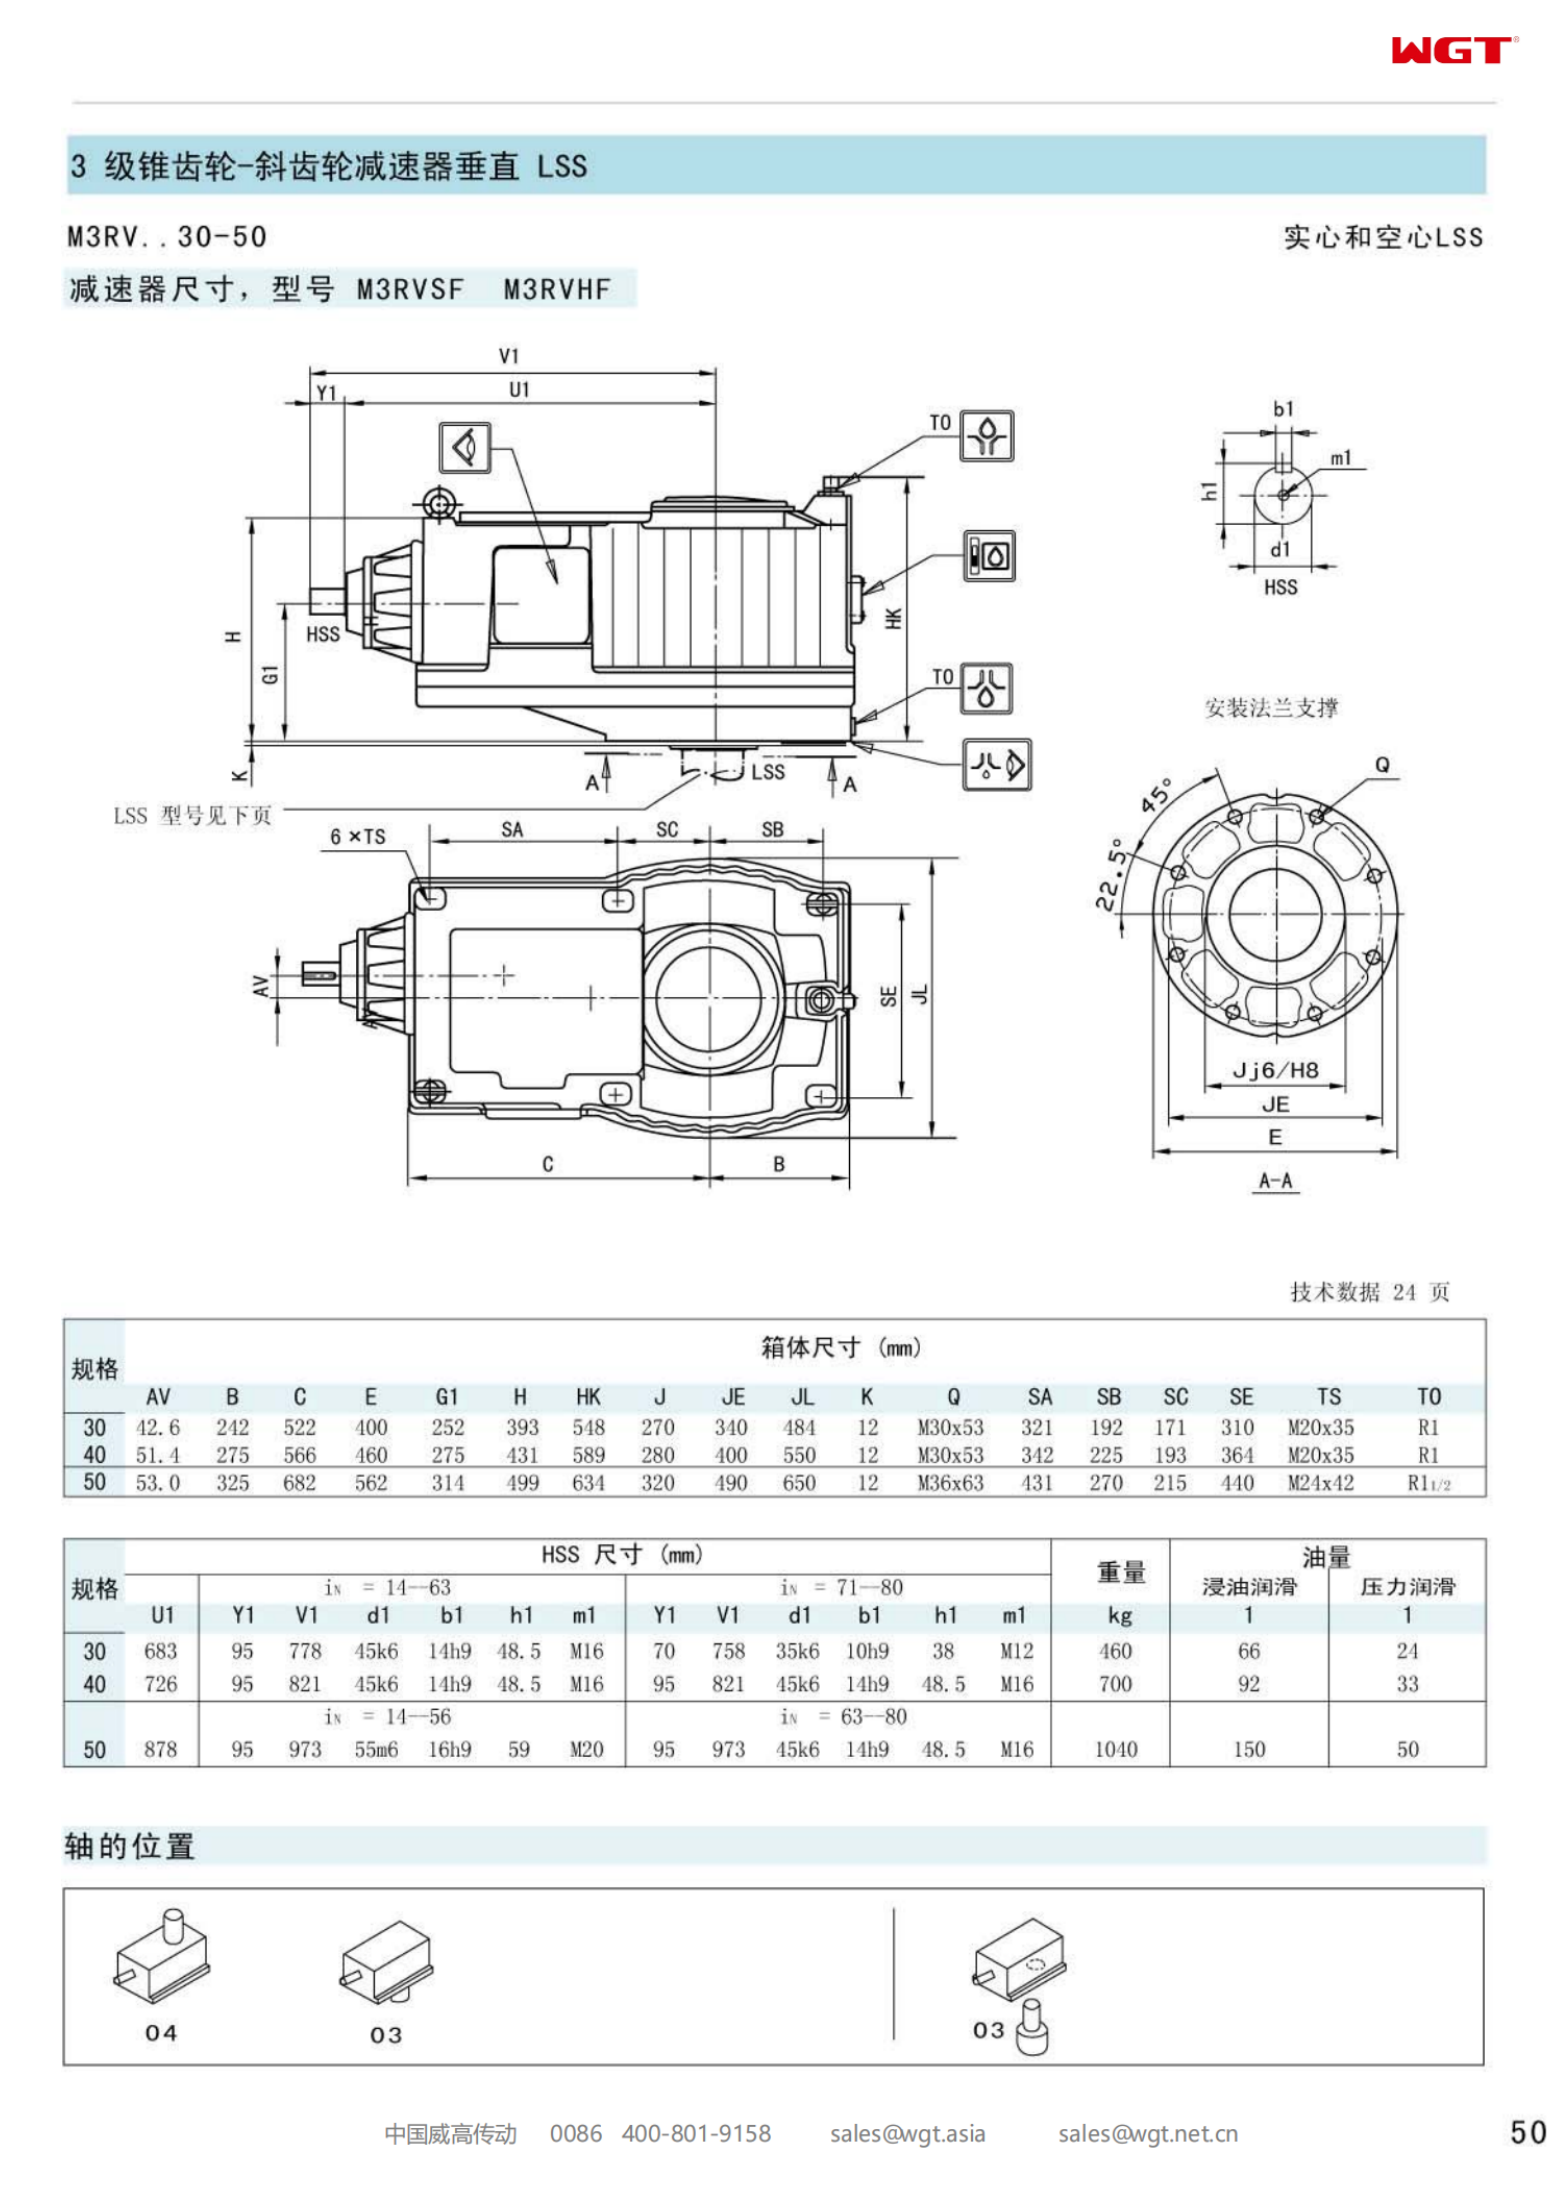 M4PVHF60 Replace_SEW_M_Series Gearbox